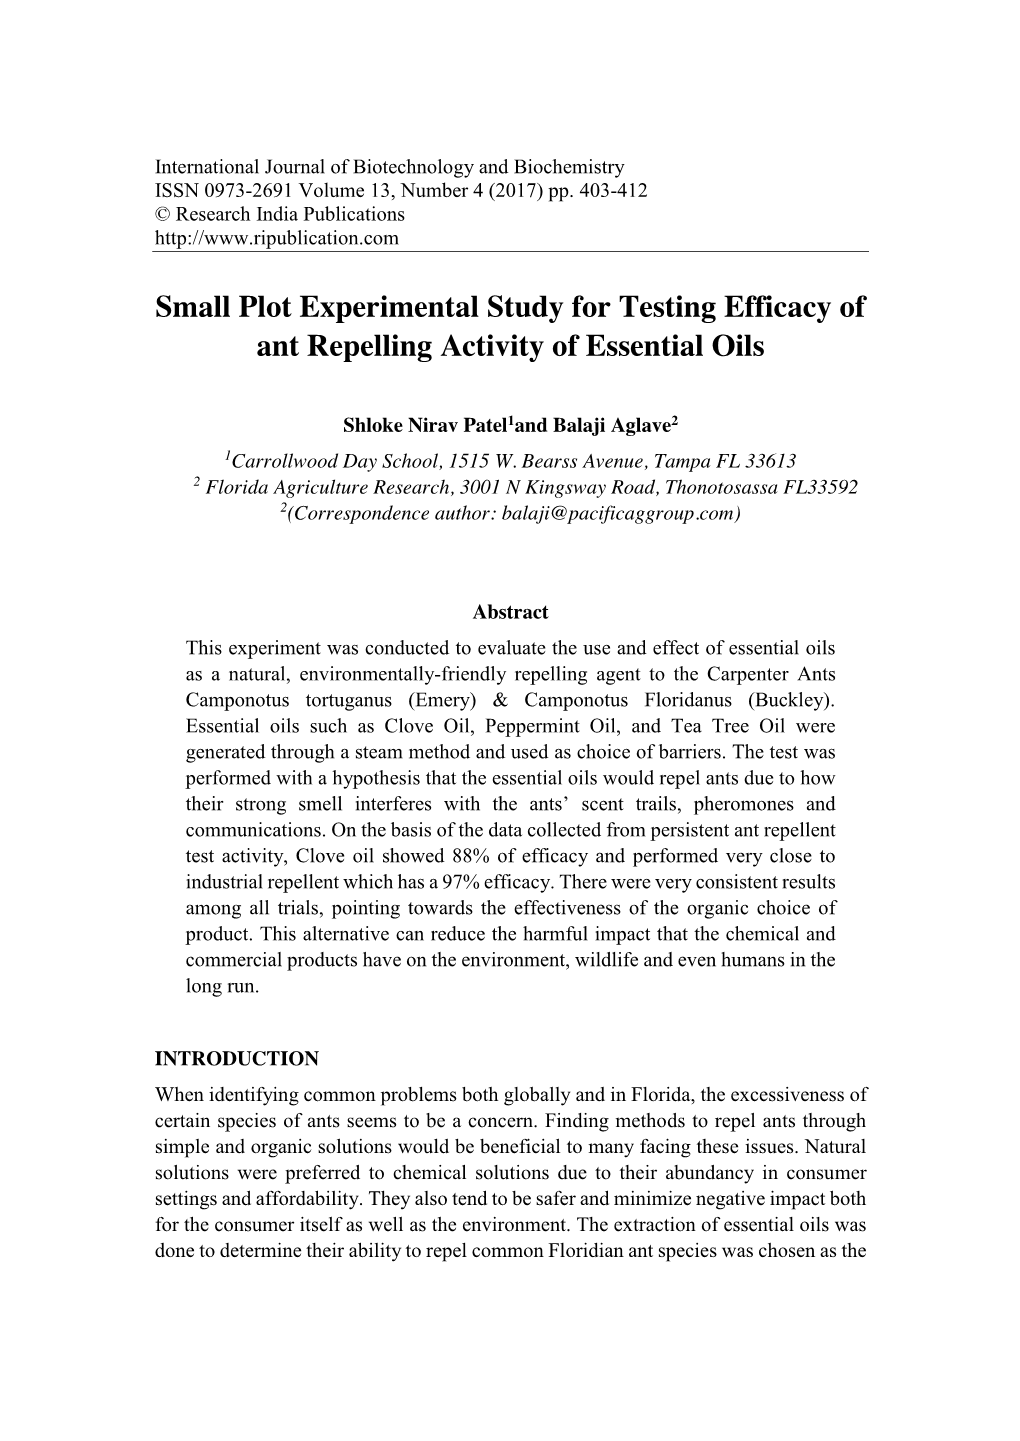 Small Plot Experimental Study for Testing Efficacy of Ant Repelling Activity of Essential Oils